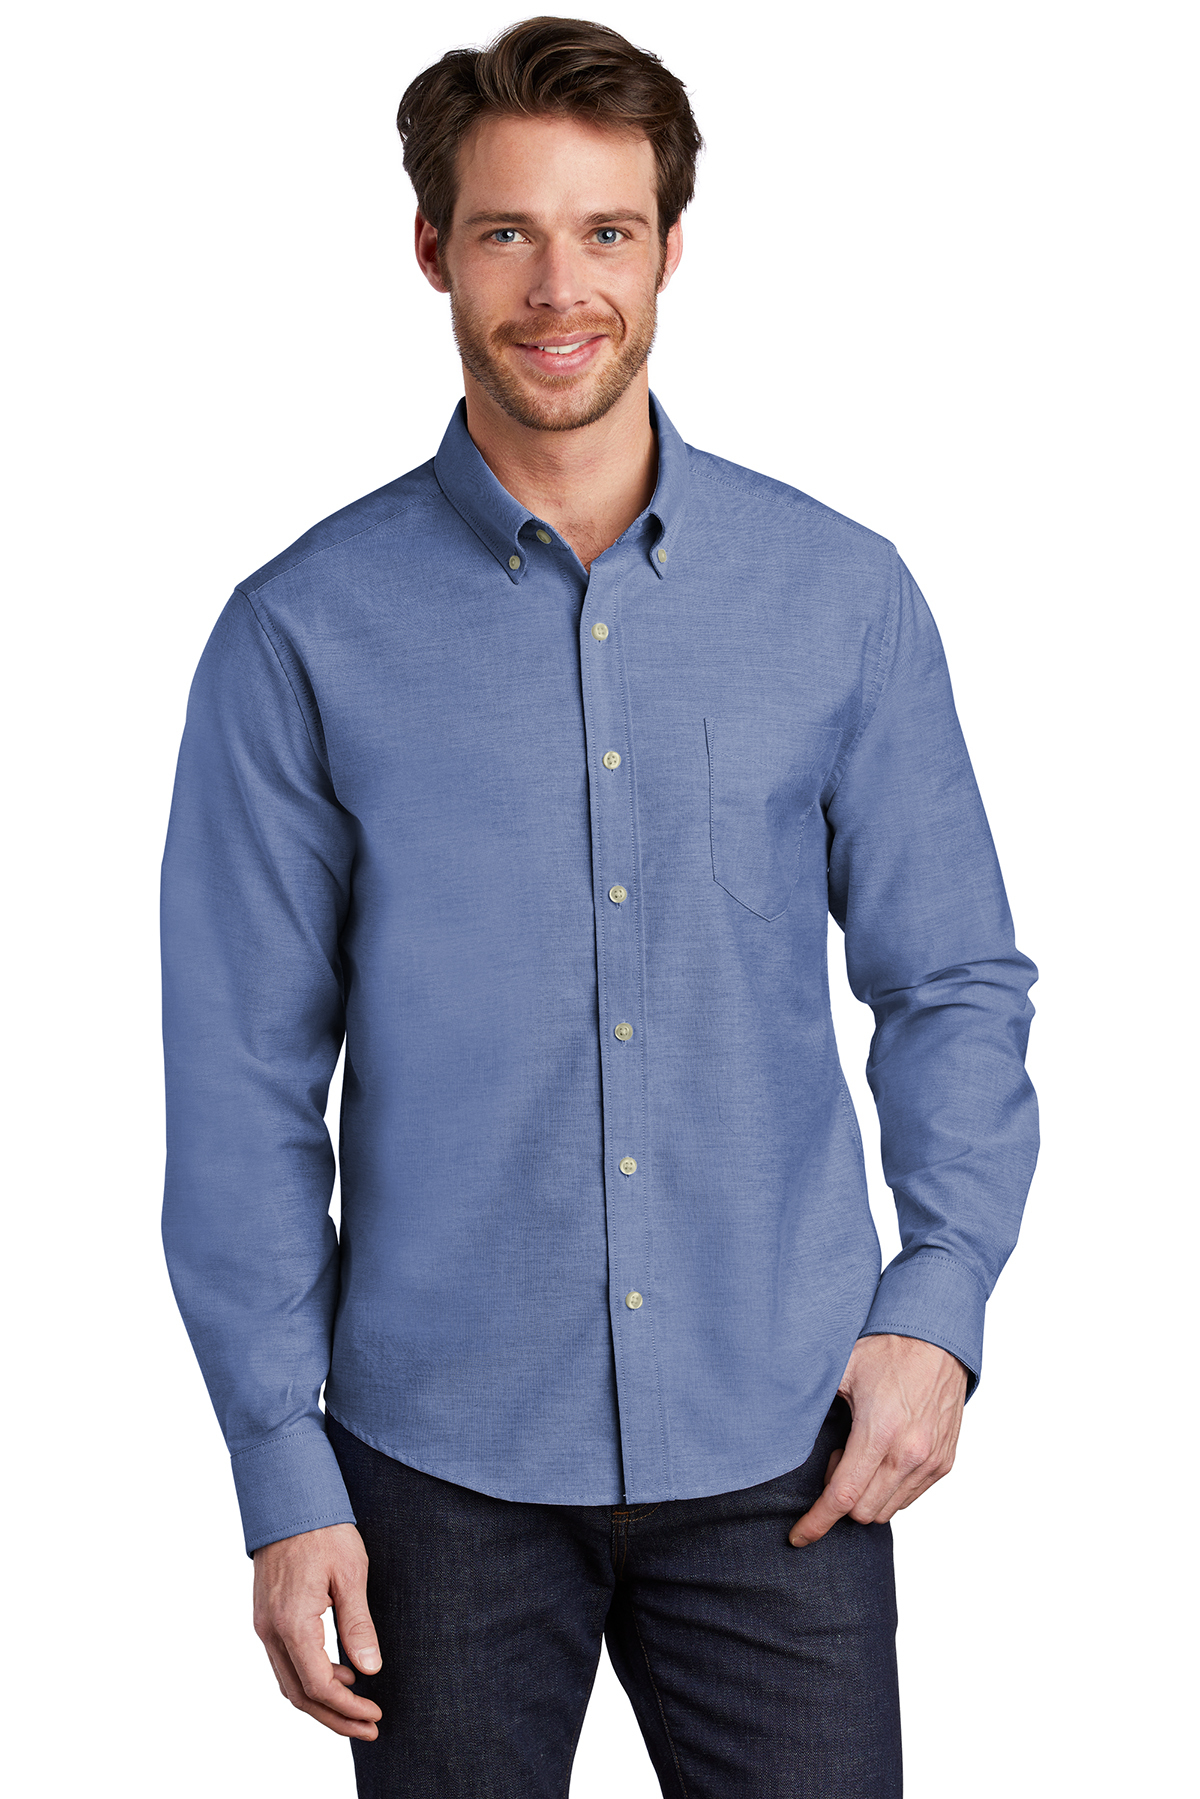 Port Authority Untucked Fit SuperPro Oxford Shirt | Product | SanMar